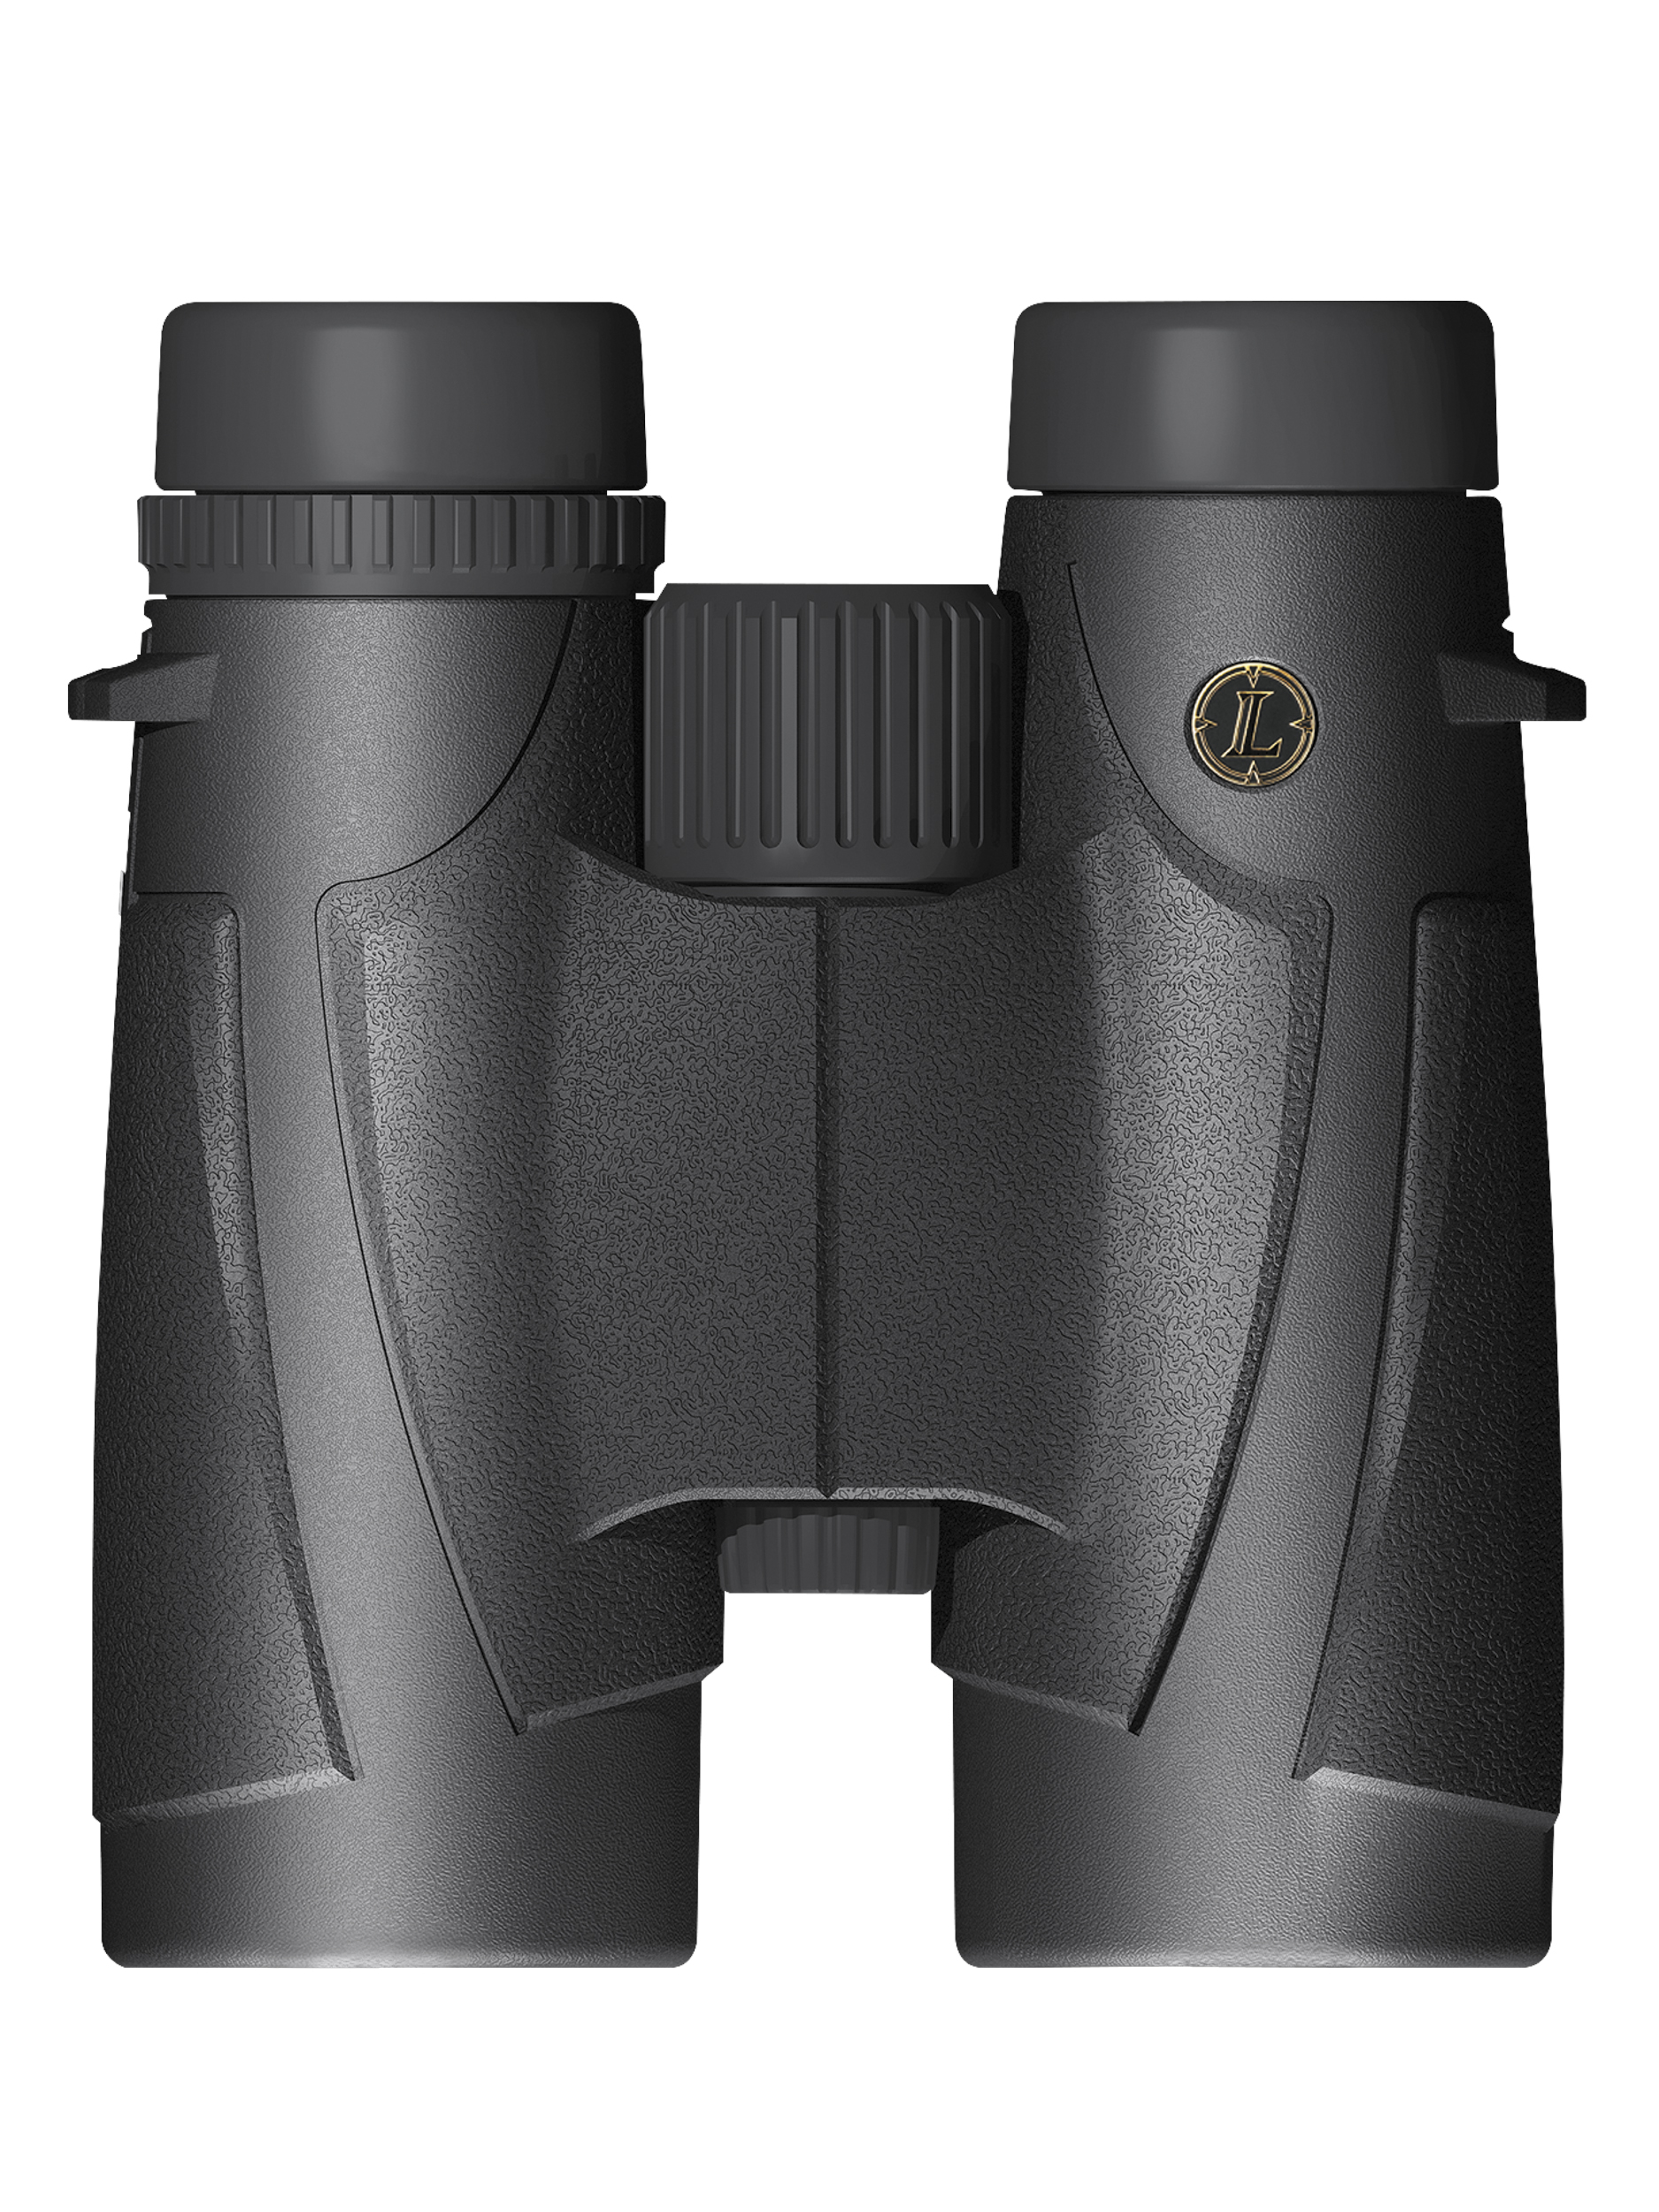 23 Tactical and Traditional New Optics for 2014 - Leupold BX-1 McKenzie Series 8x42mm/10x42mm Binoculars